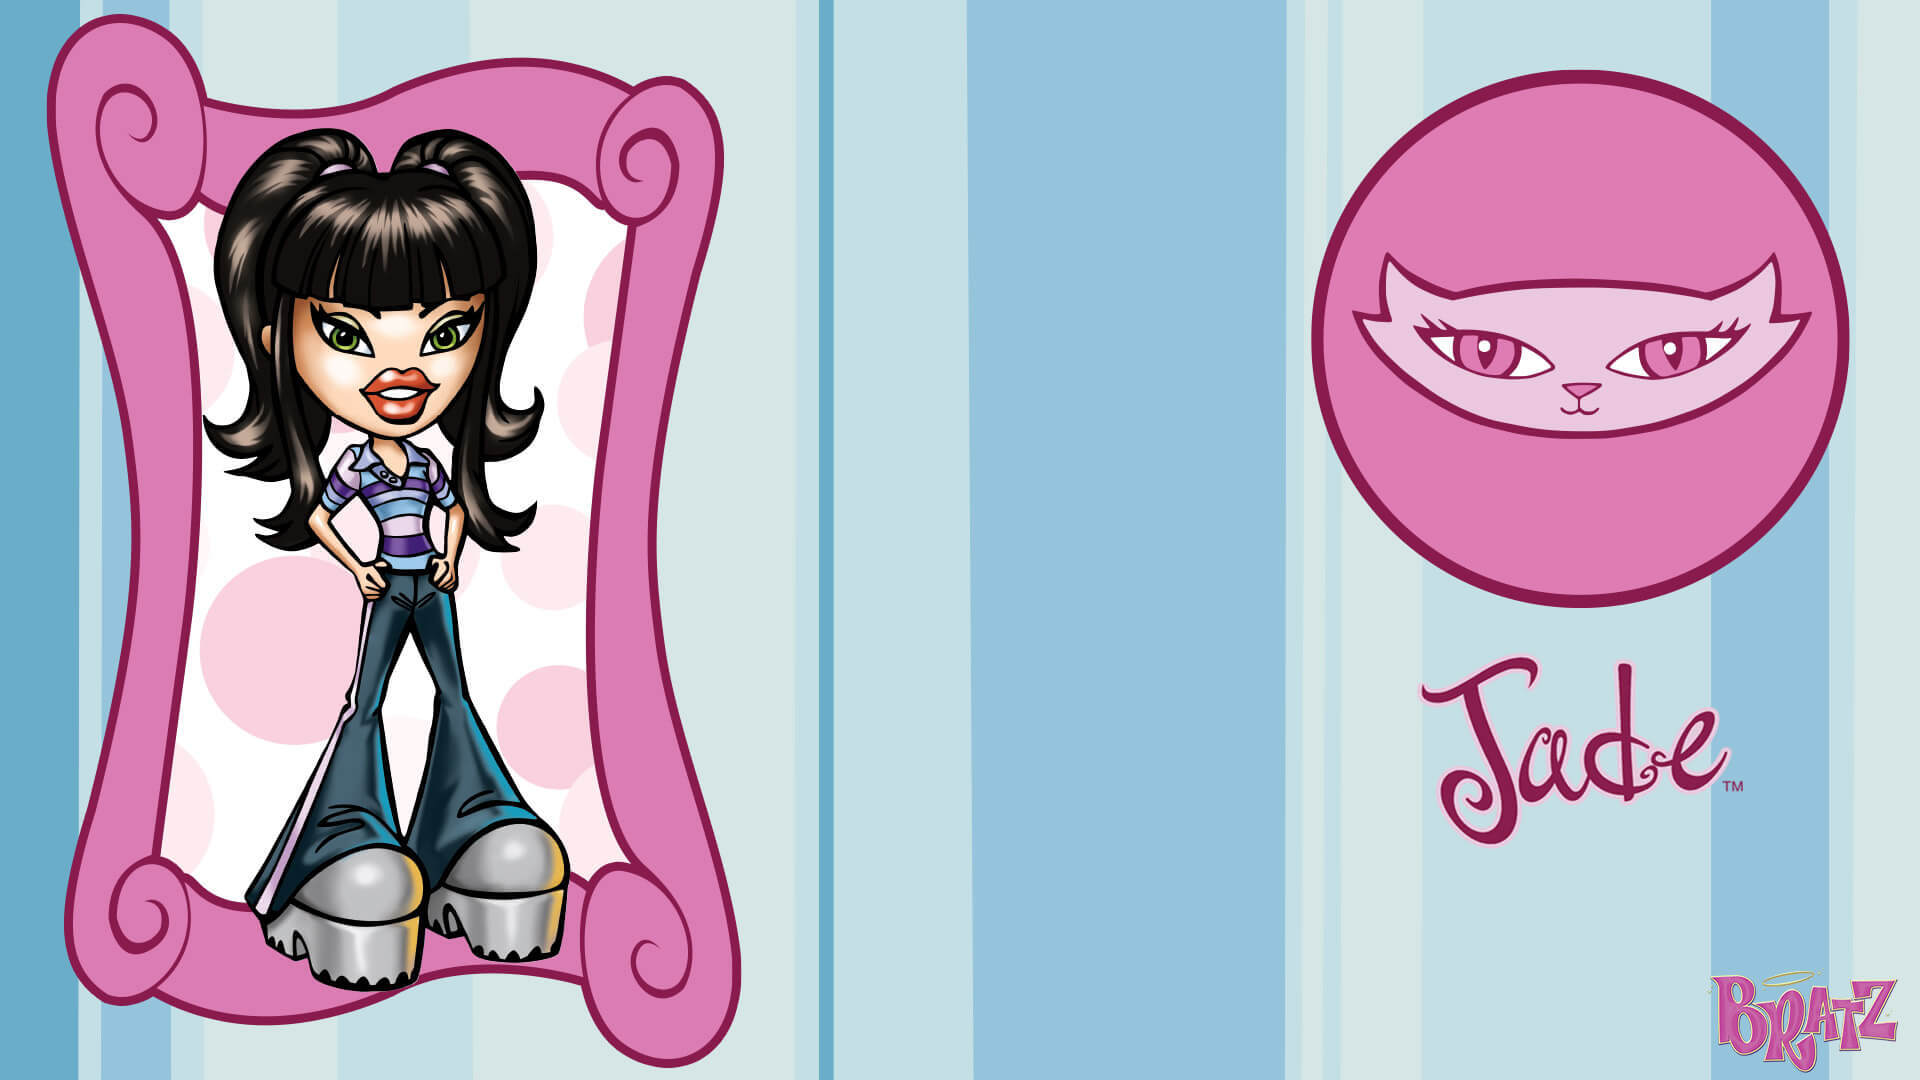 images & pictures of cartoons bratz: bratz backgrounds for your video.